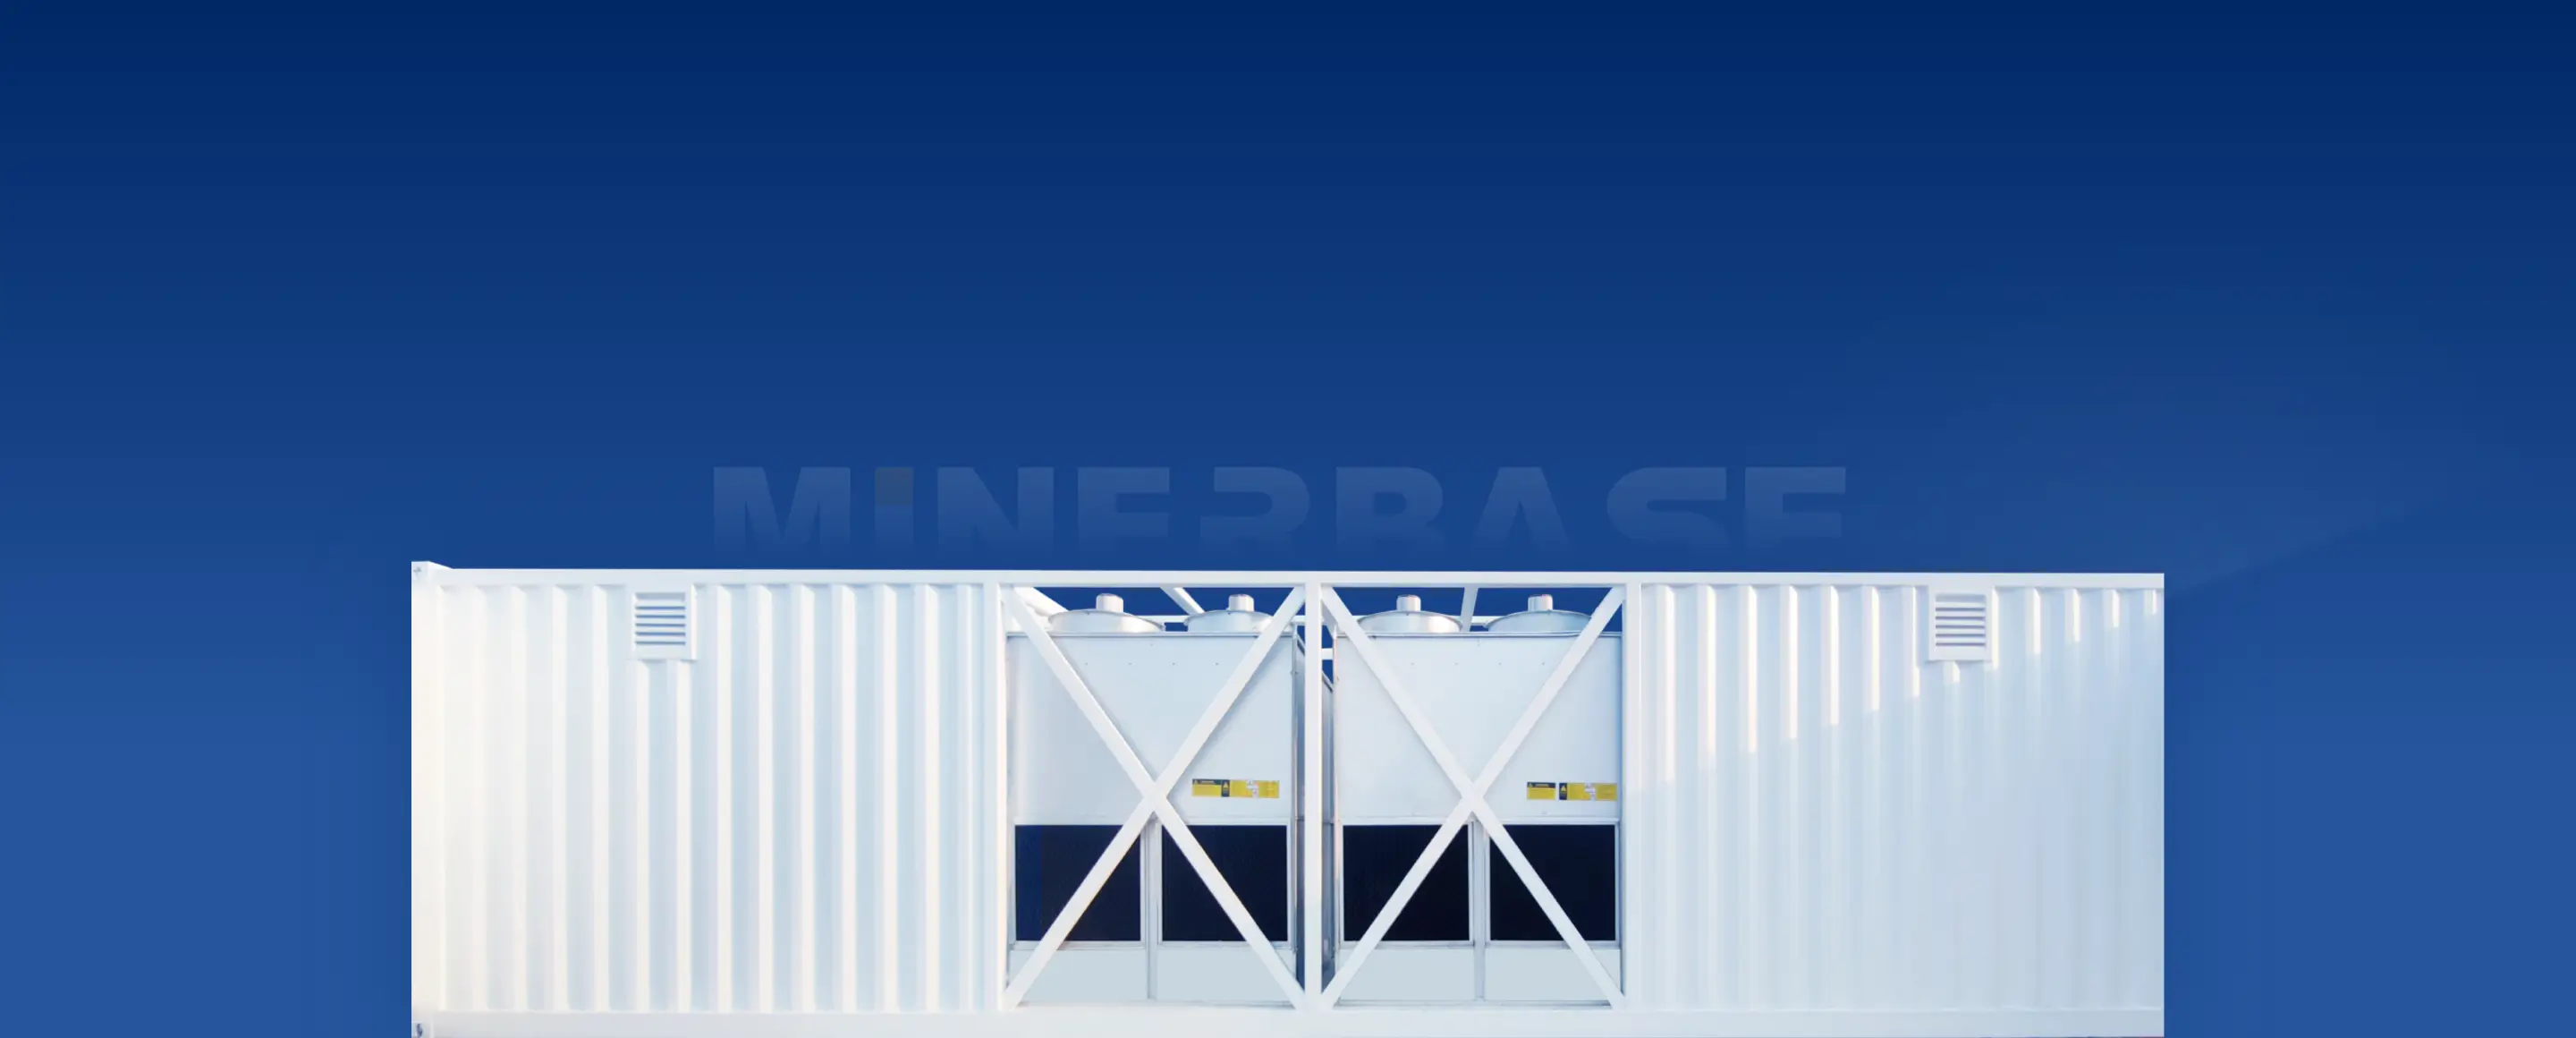 Minerbase mobile crypto mining container